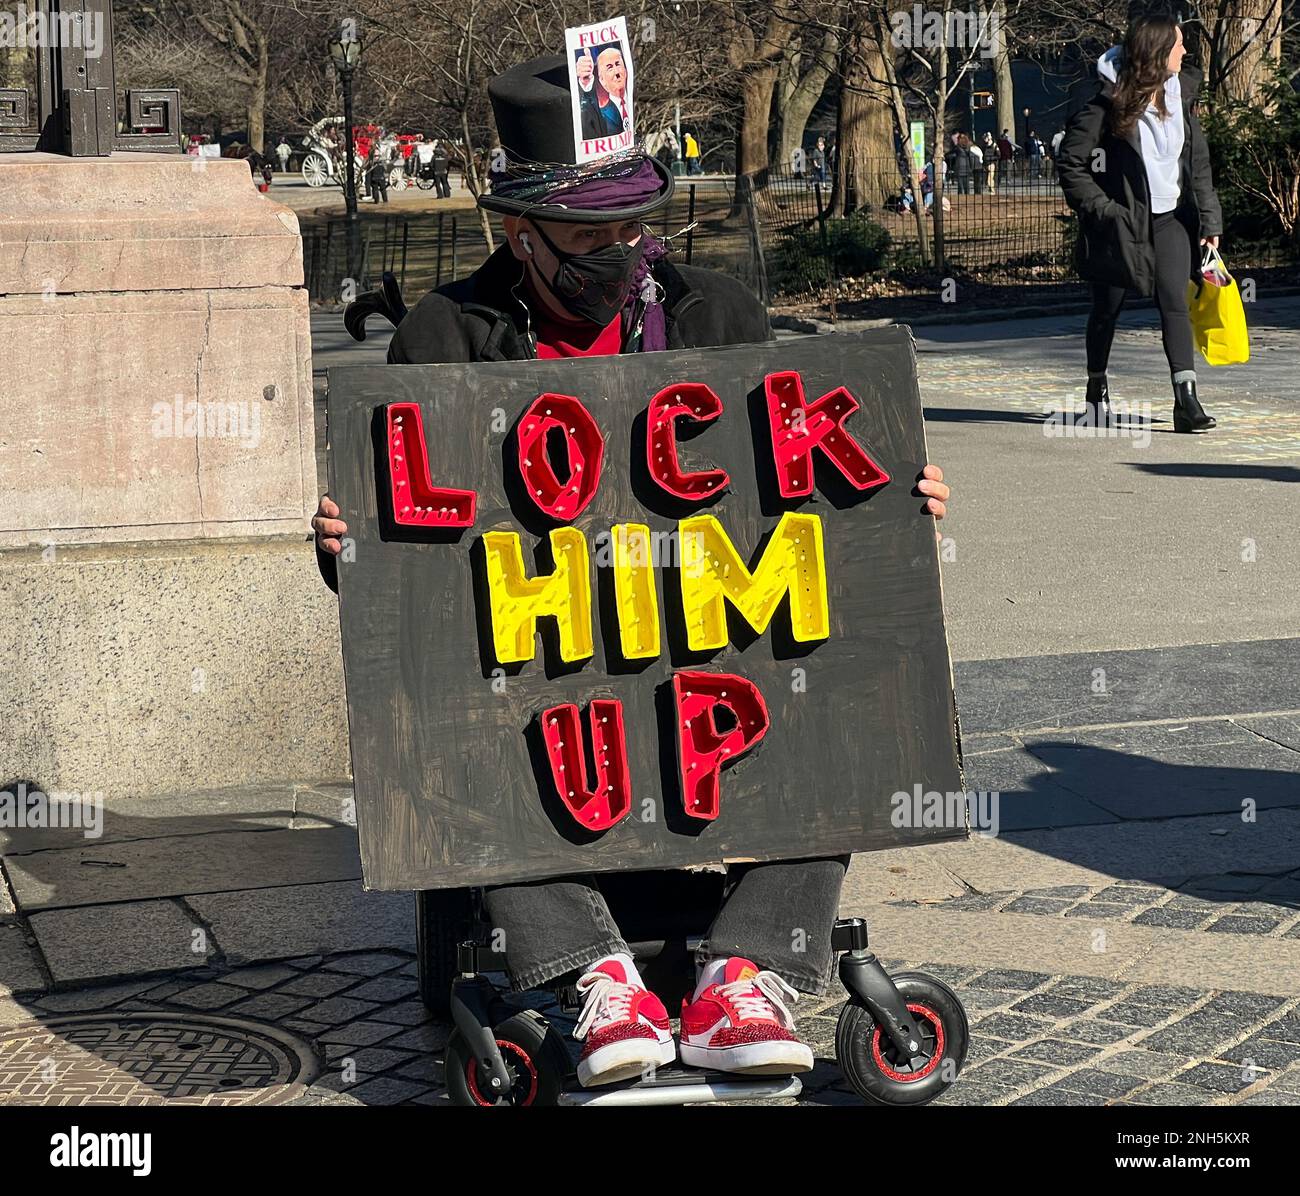 New York City, United States. 20th February, 2022. Dozens of demonstrators gathered in front of the Trump Tower in Columbus Circle, New York City with Anti-Trump Administration banners and signs. Credit: Ryan Rahman/Alamy Live News Stock Photo